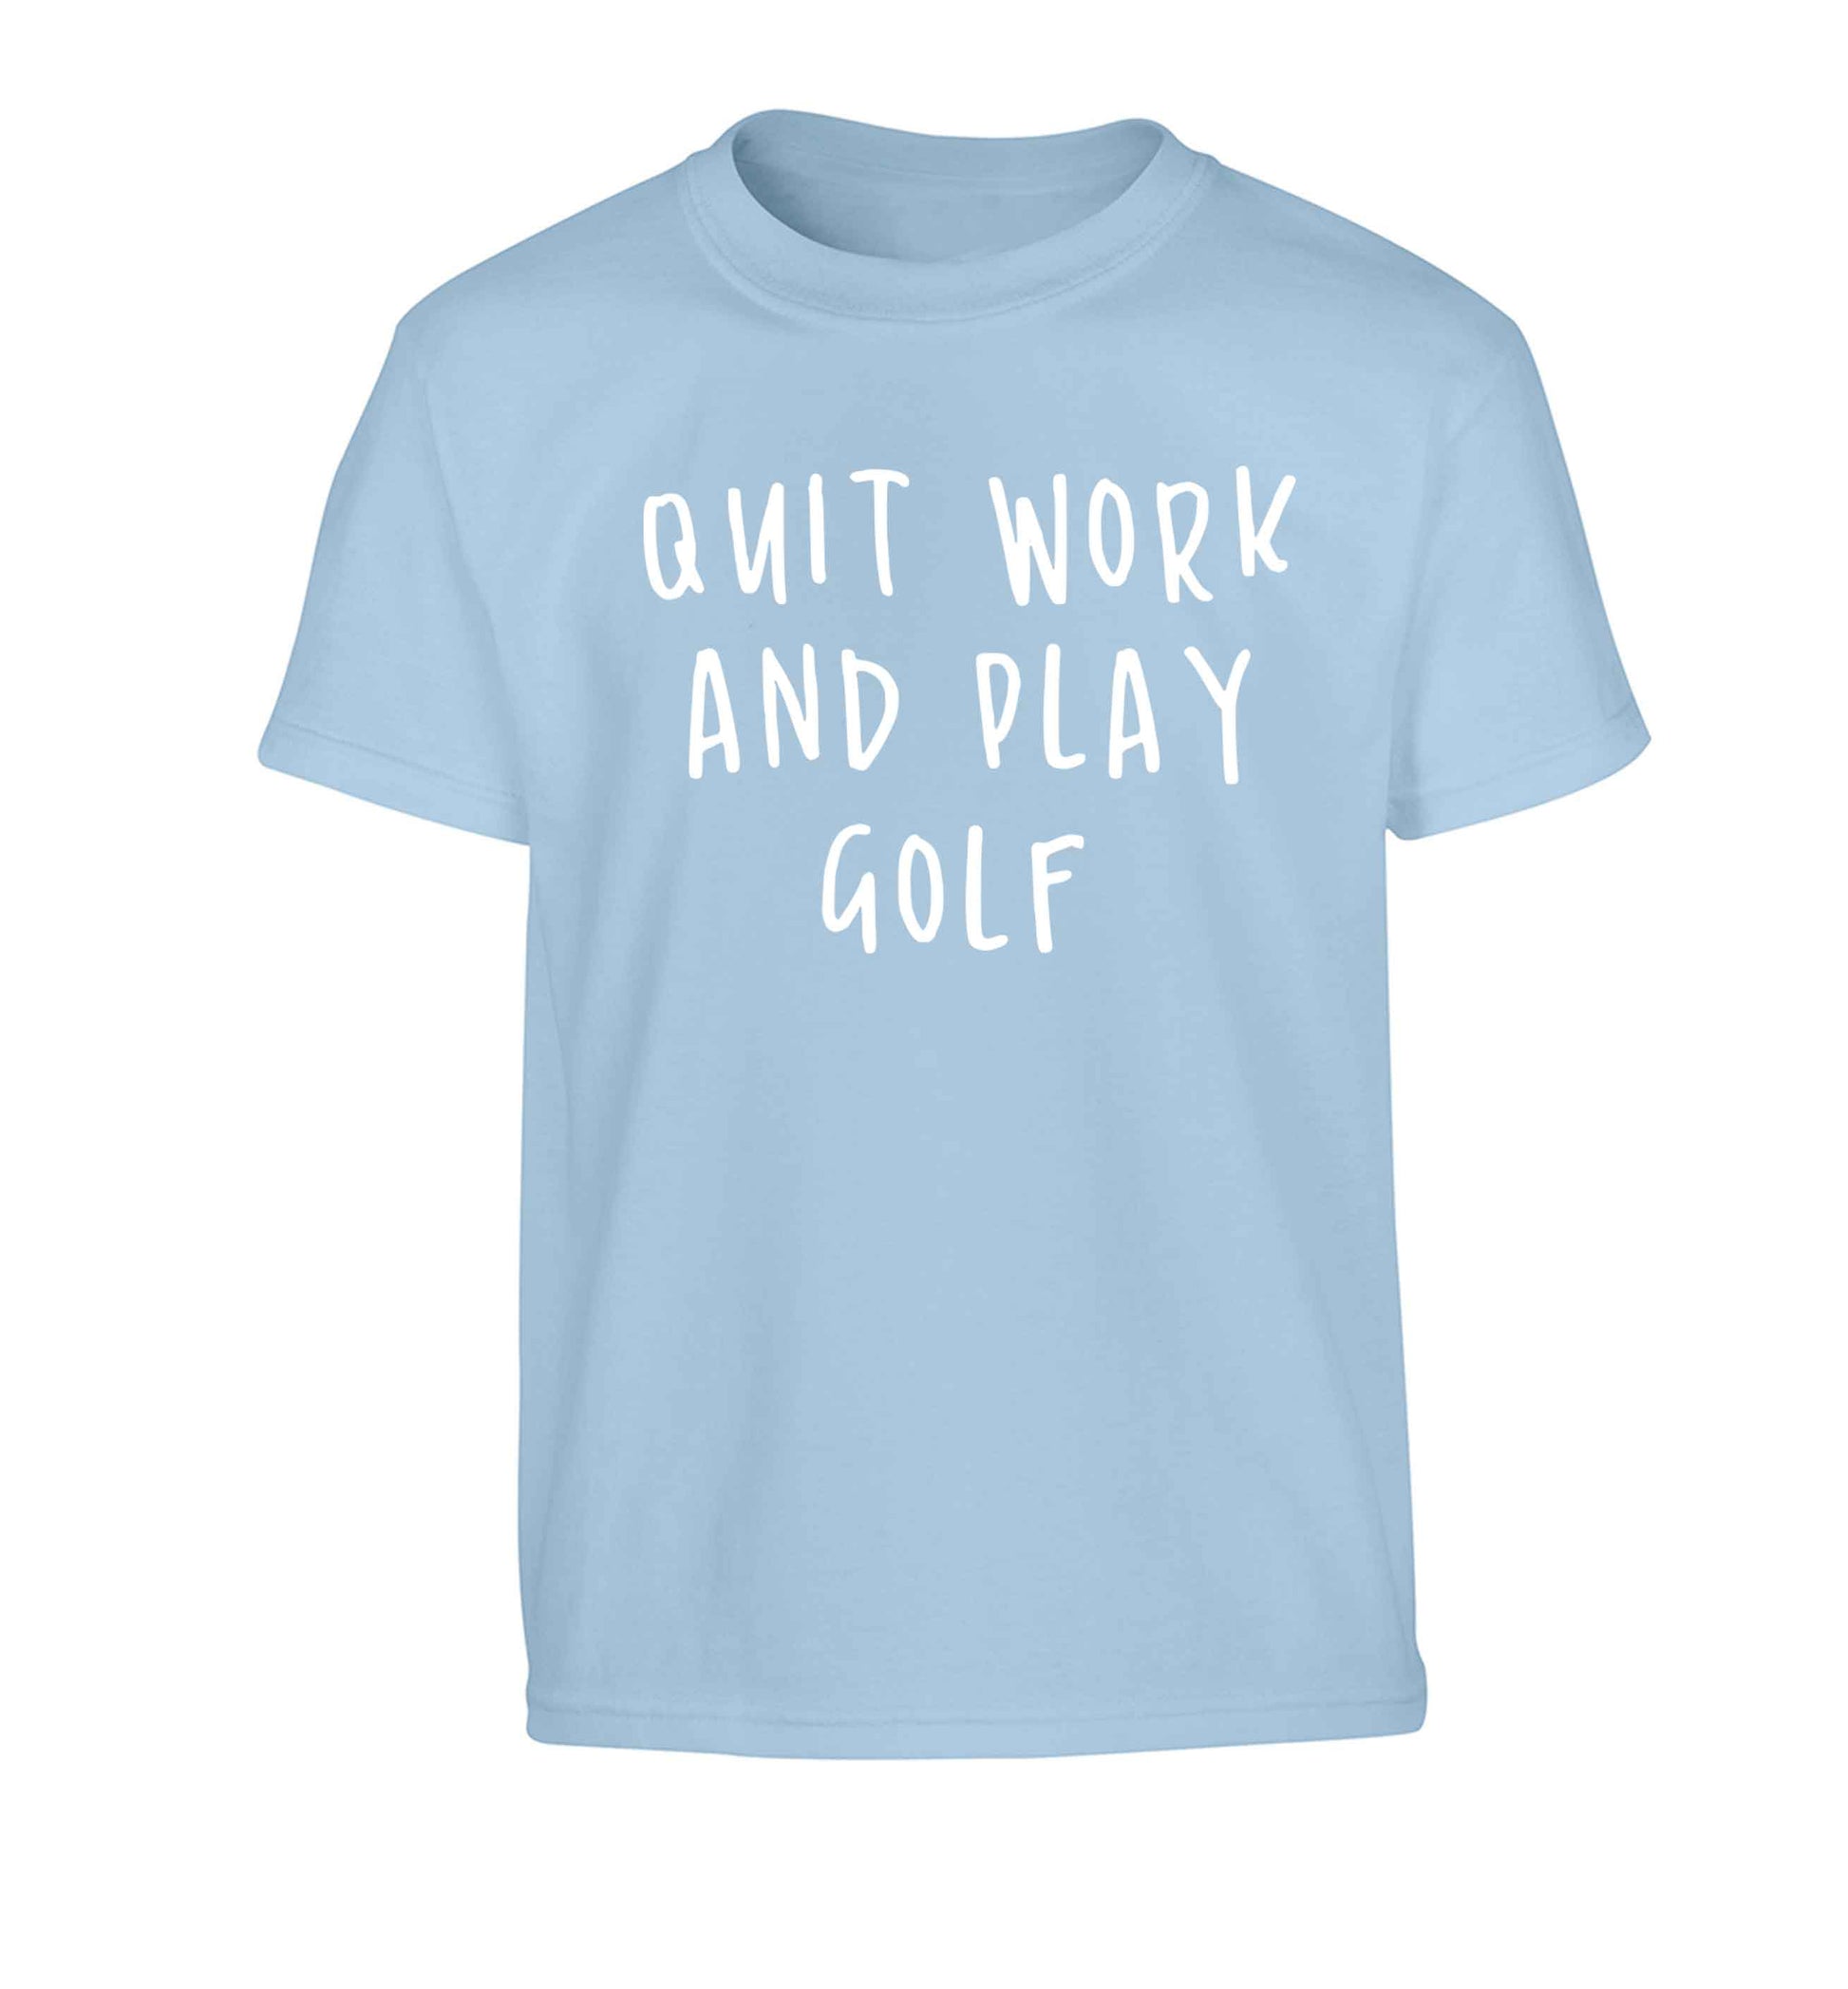 Quit work and play golf Children's light blue Tshirt 12-13 Years